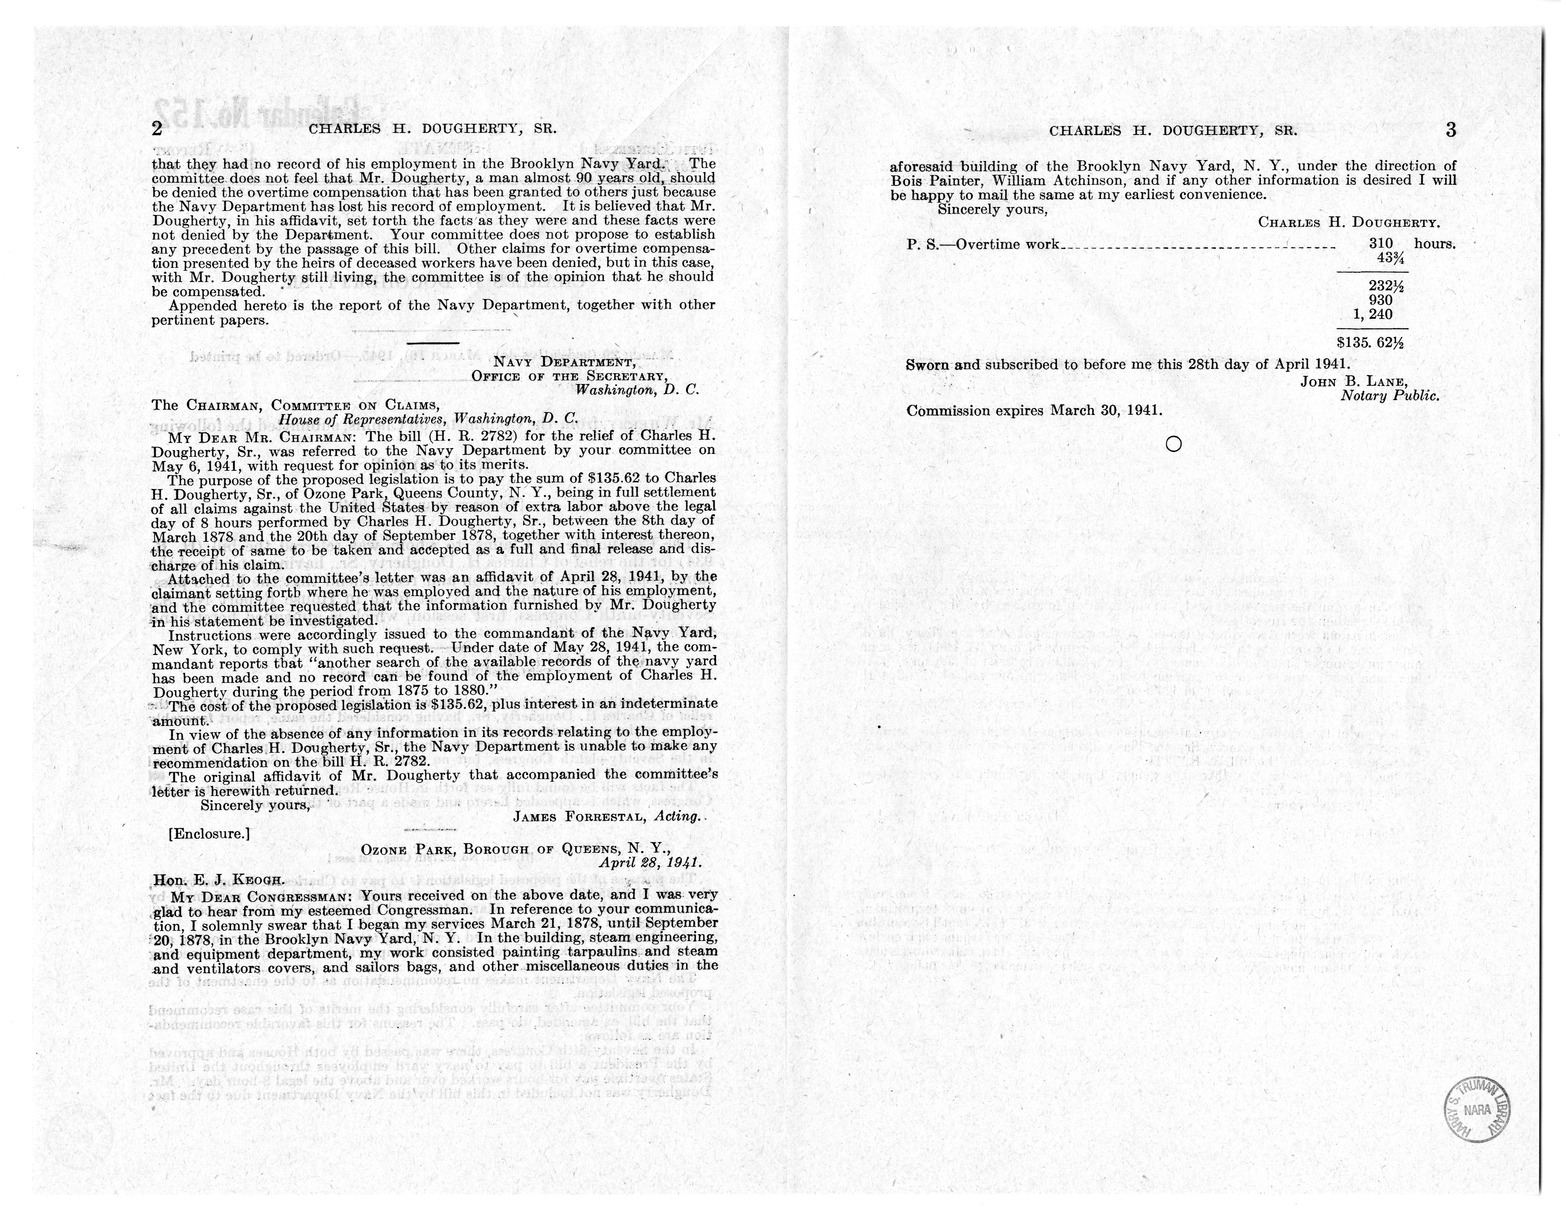 Memorandum from Frederick J. Bailey to M. C. Latta, H.R. 934, For the Relief of Charles H. Dougherty, Senior, with Attachments